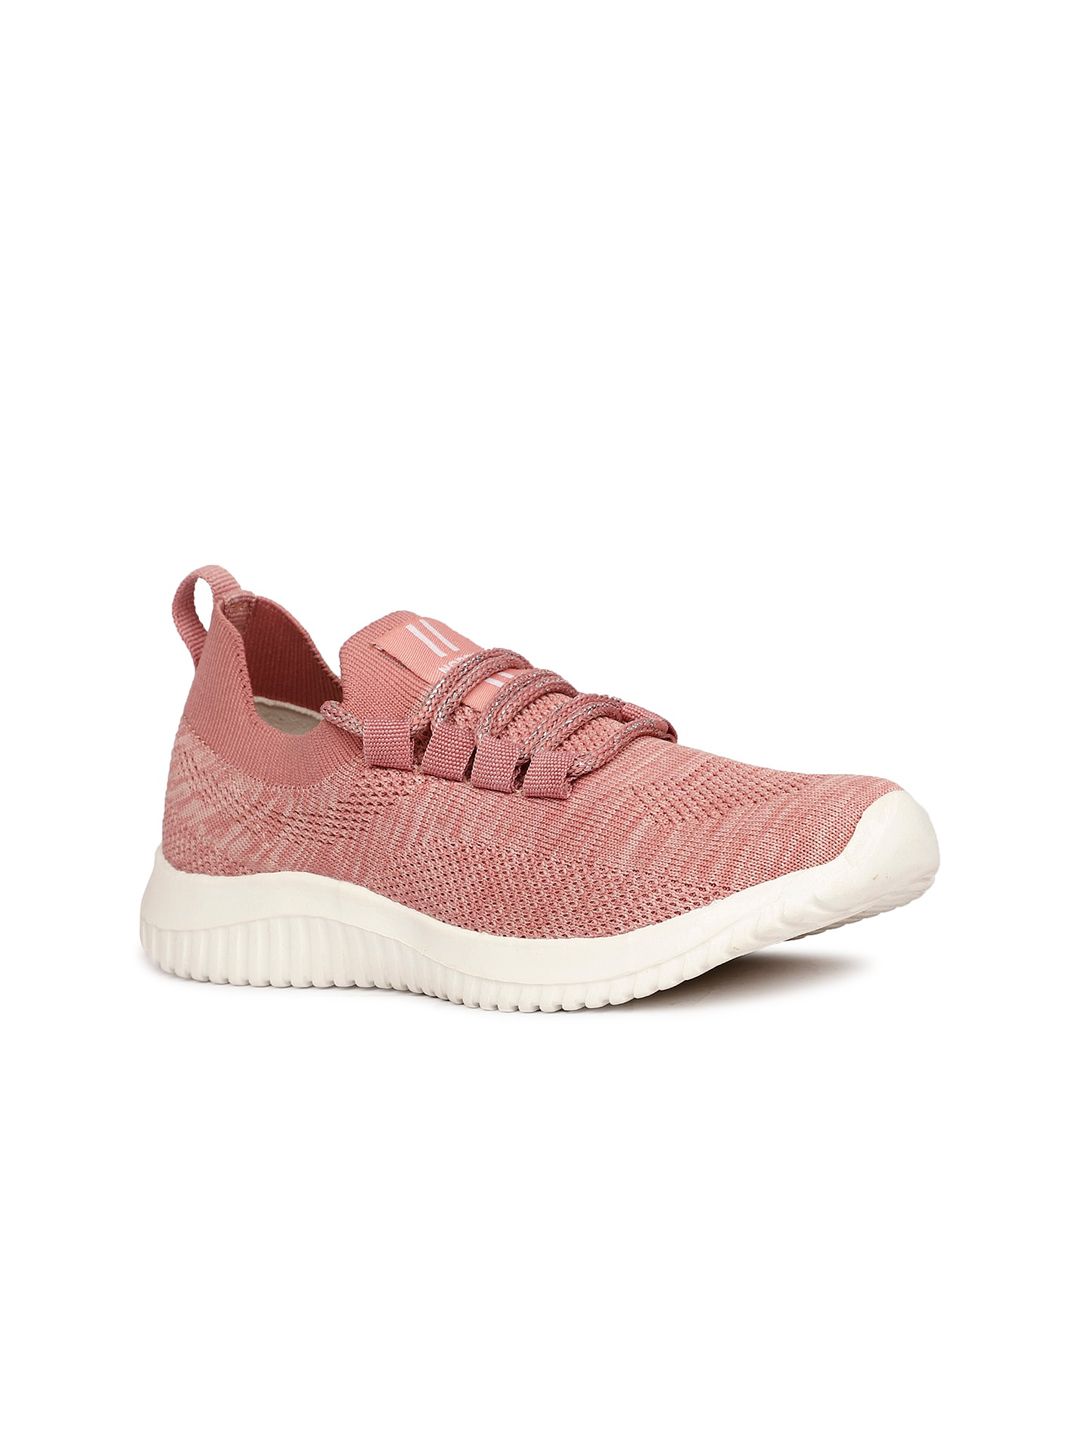 North Star Women Woven Design Sneakers Price in India